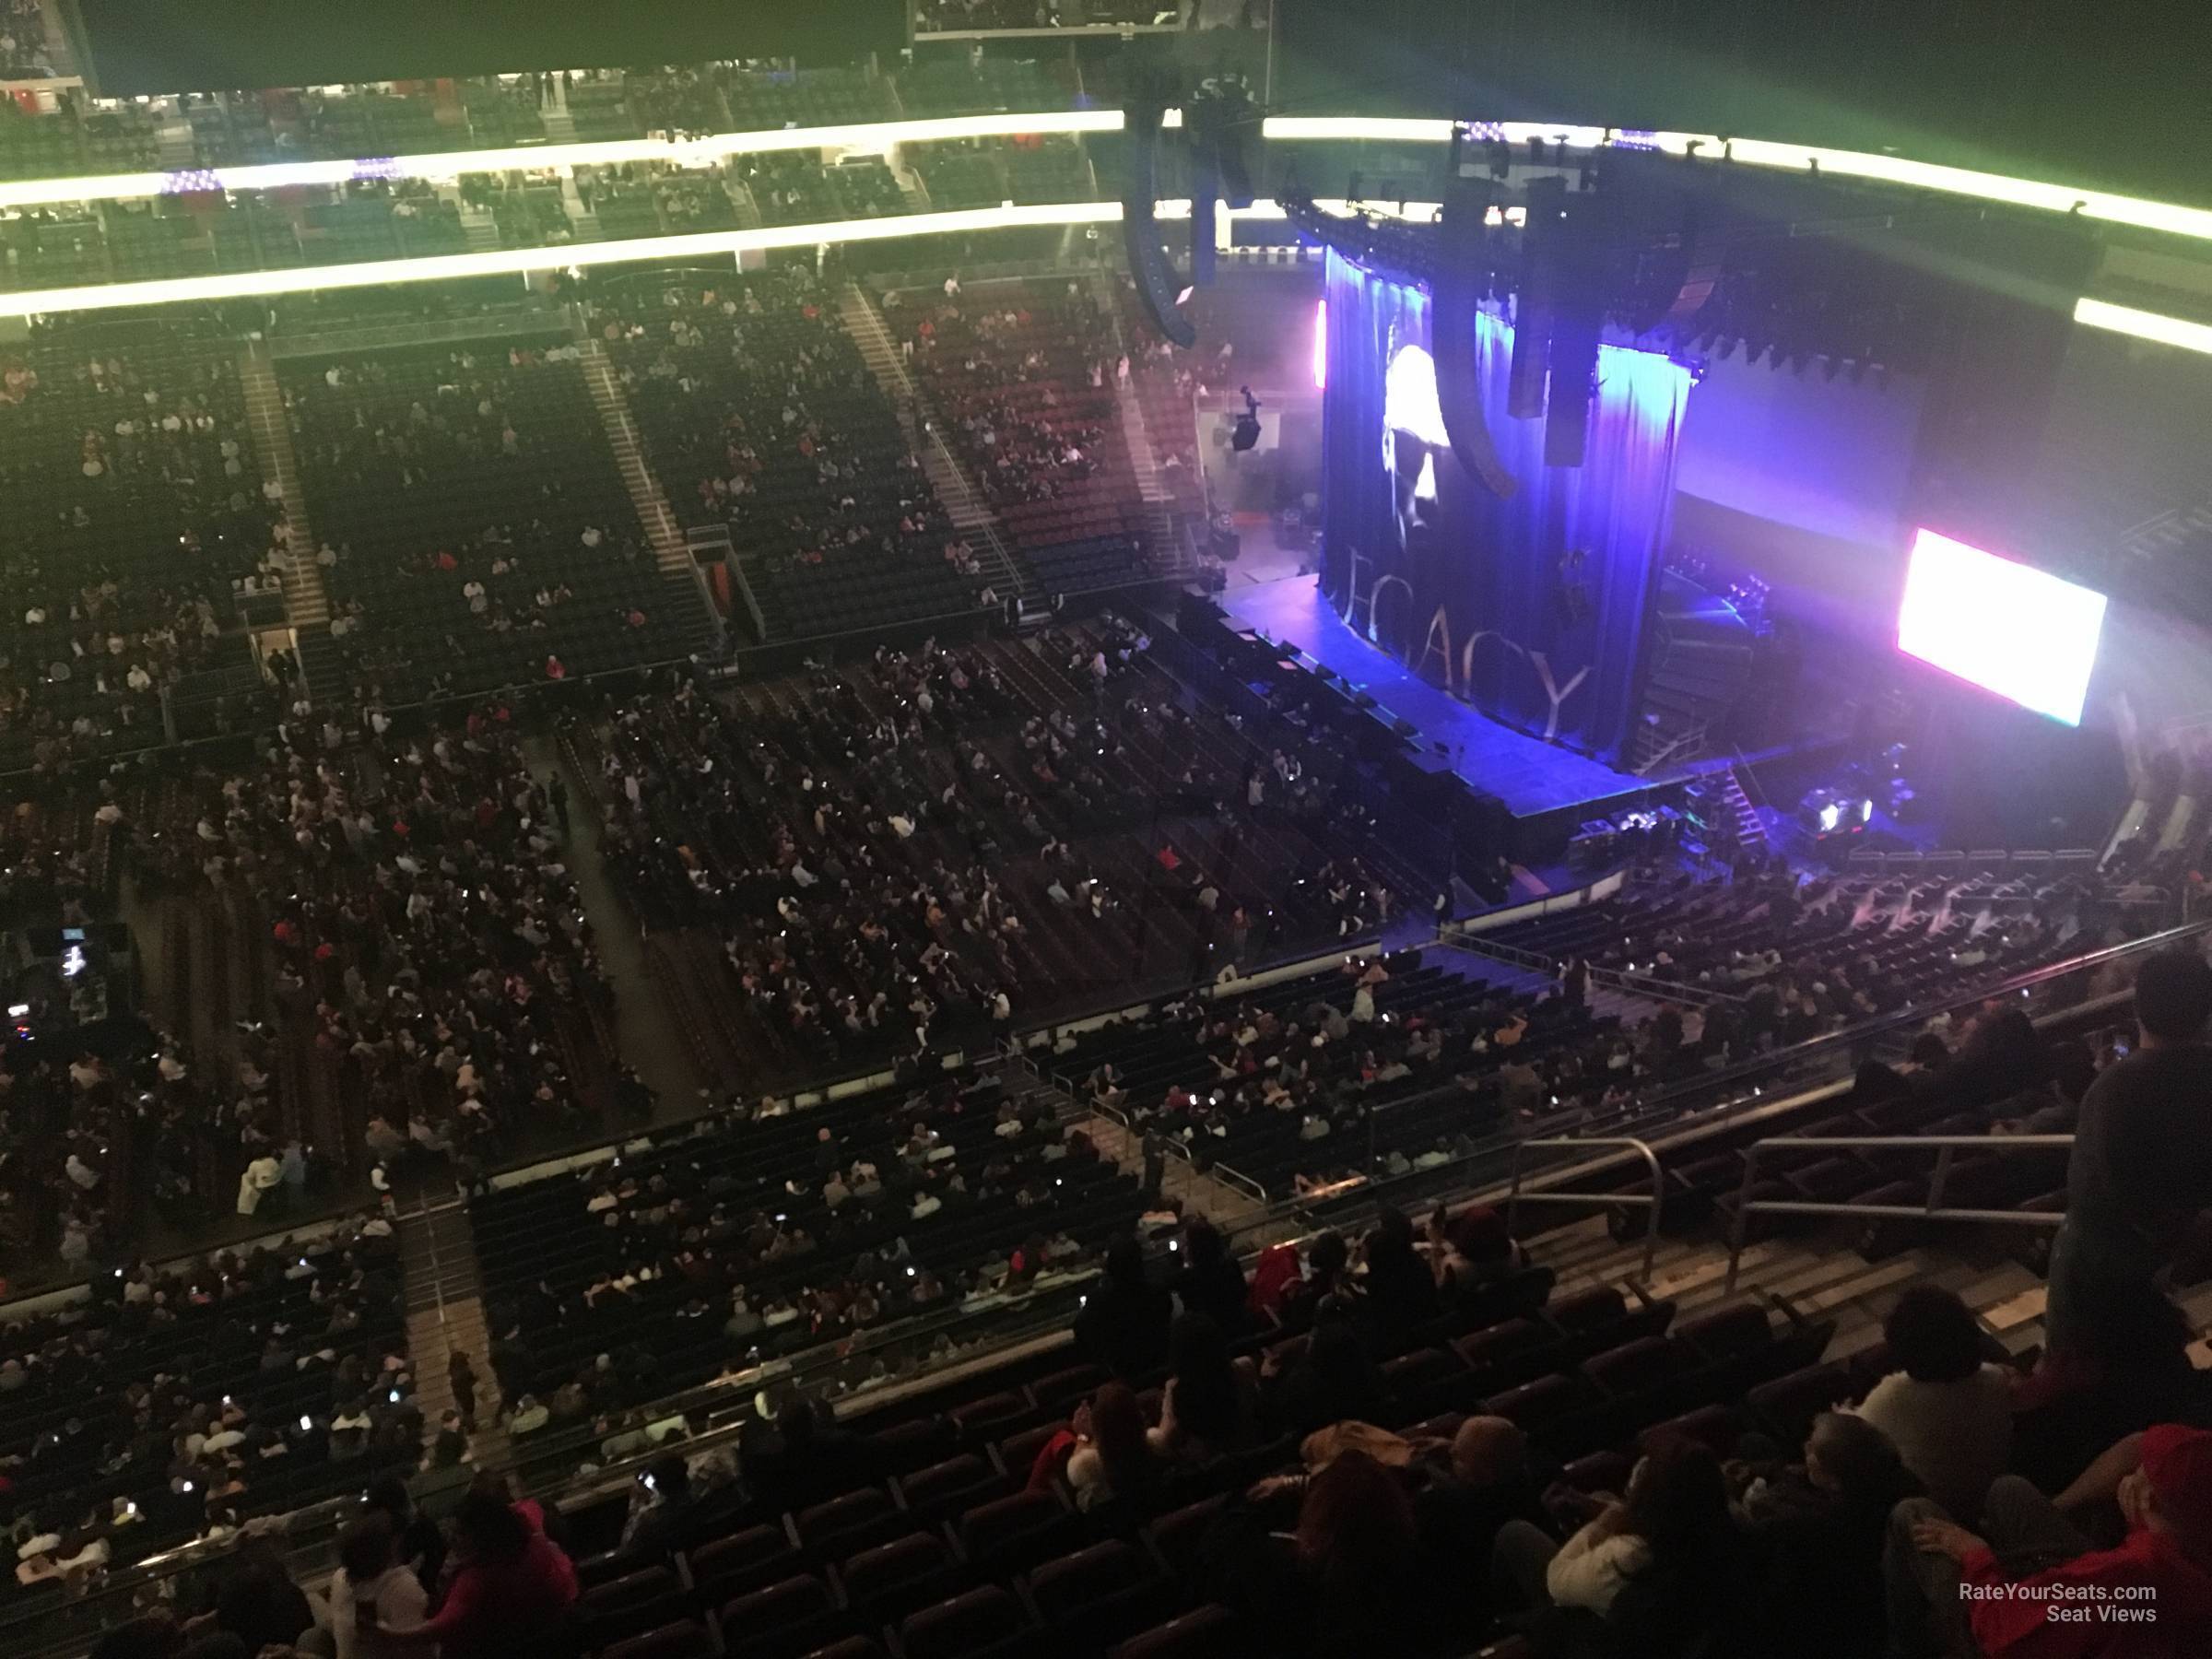 section 211, row 4 seat view  for concert - prudential center